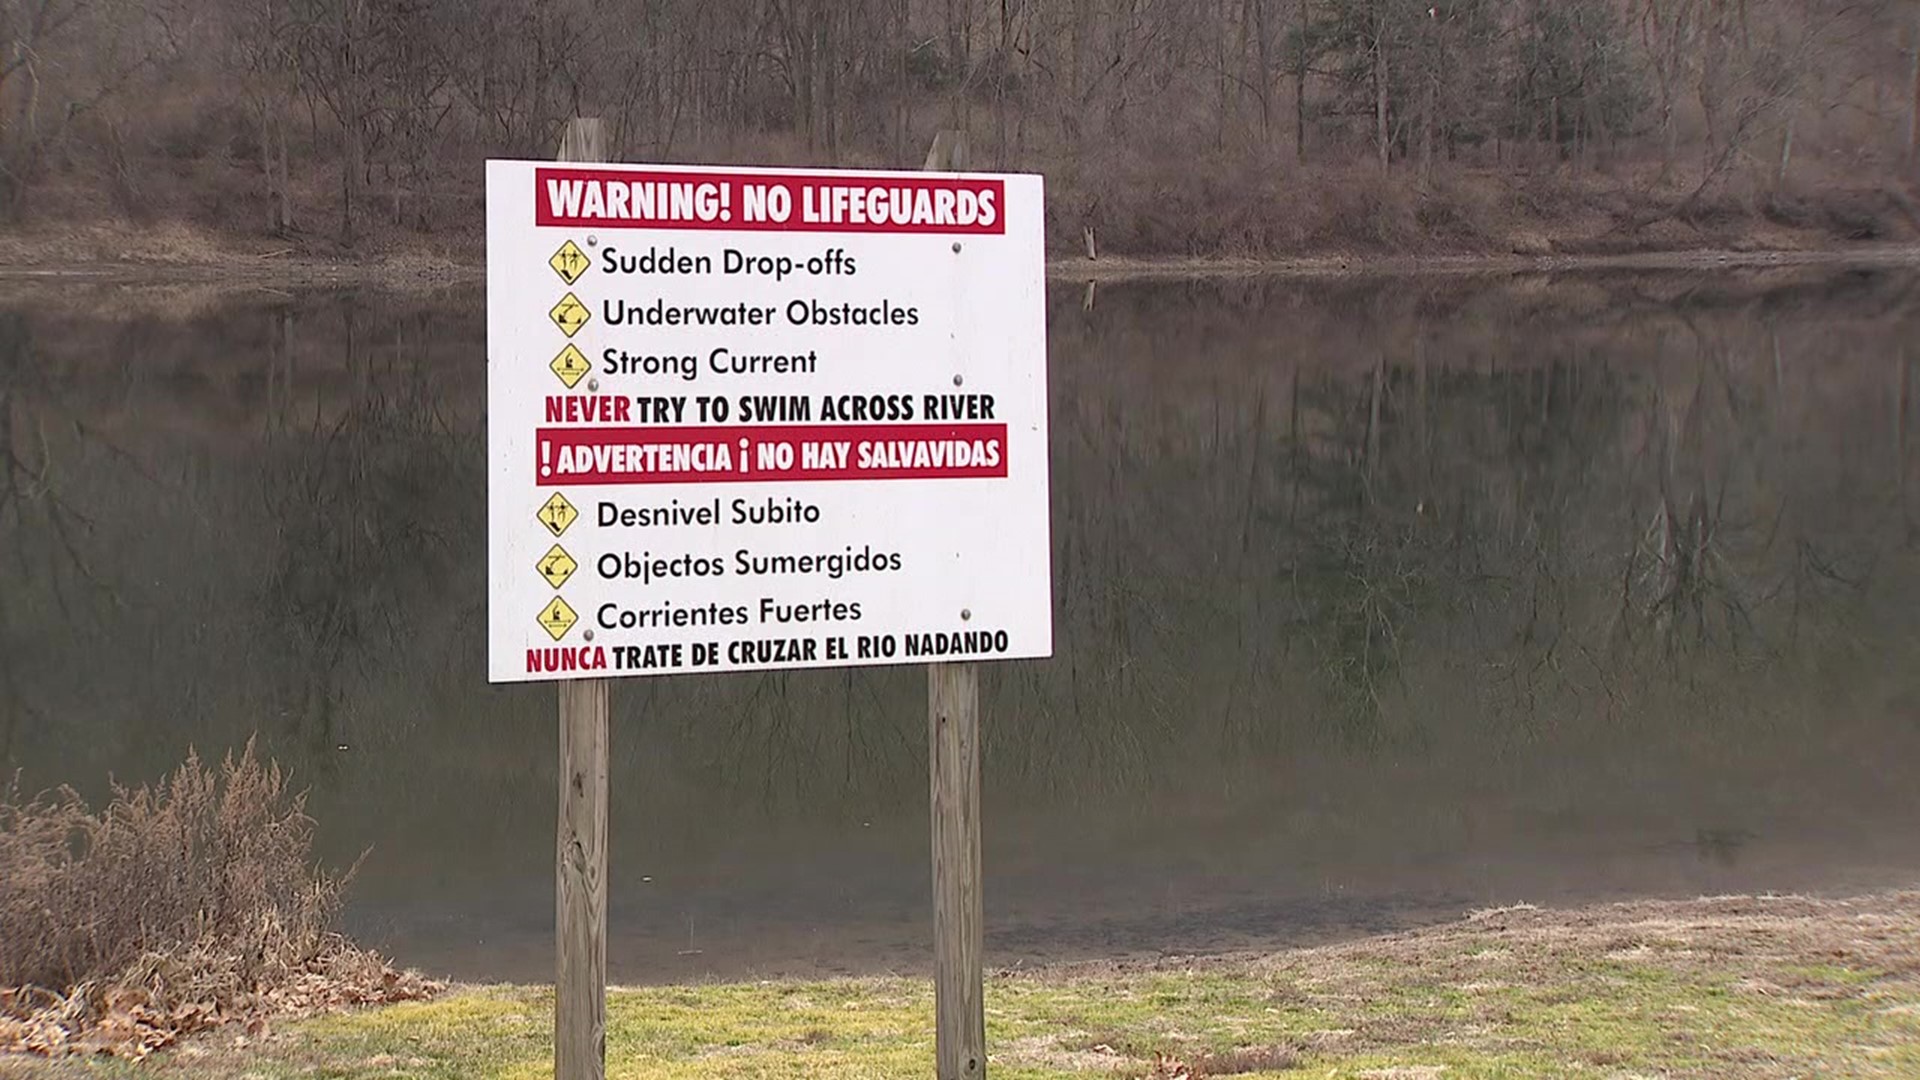 After some beaches within the Delaware Water Gap National Recreation Area were left unattended last year, park officials are putting the plea out for lifeguards.